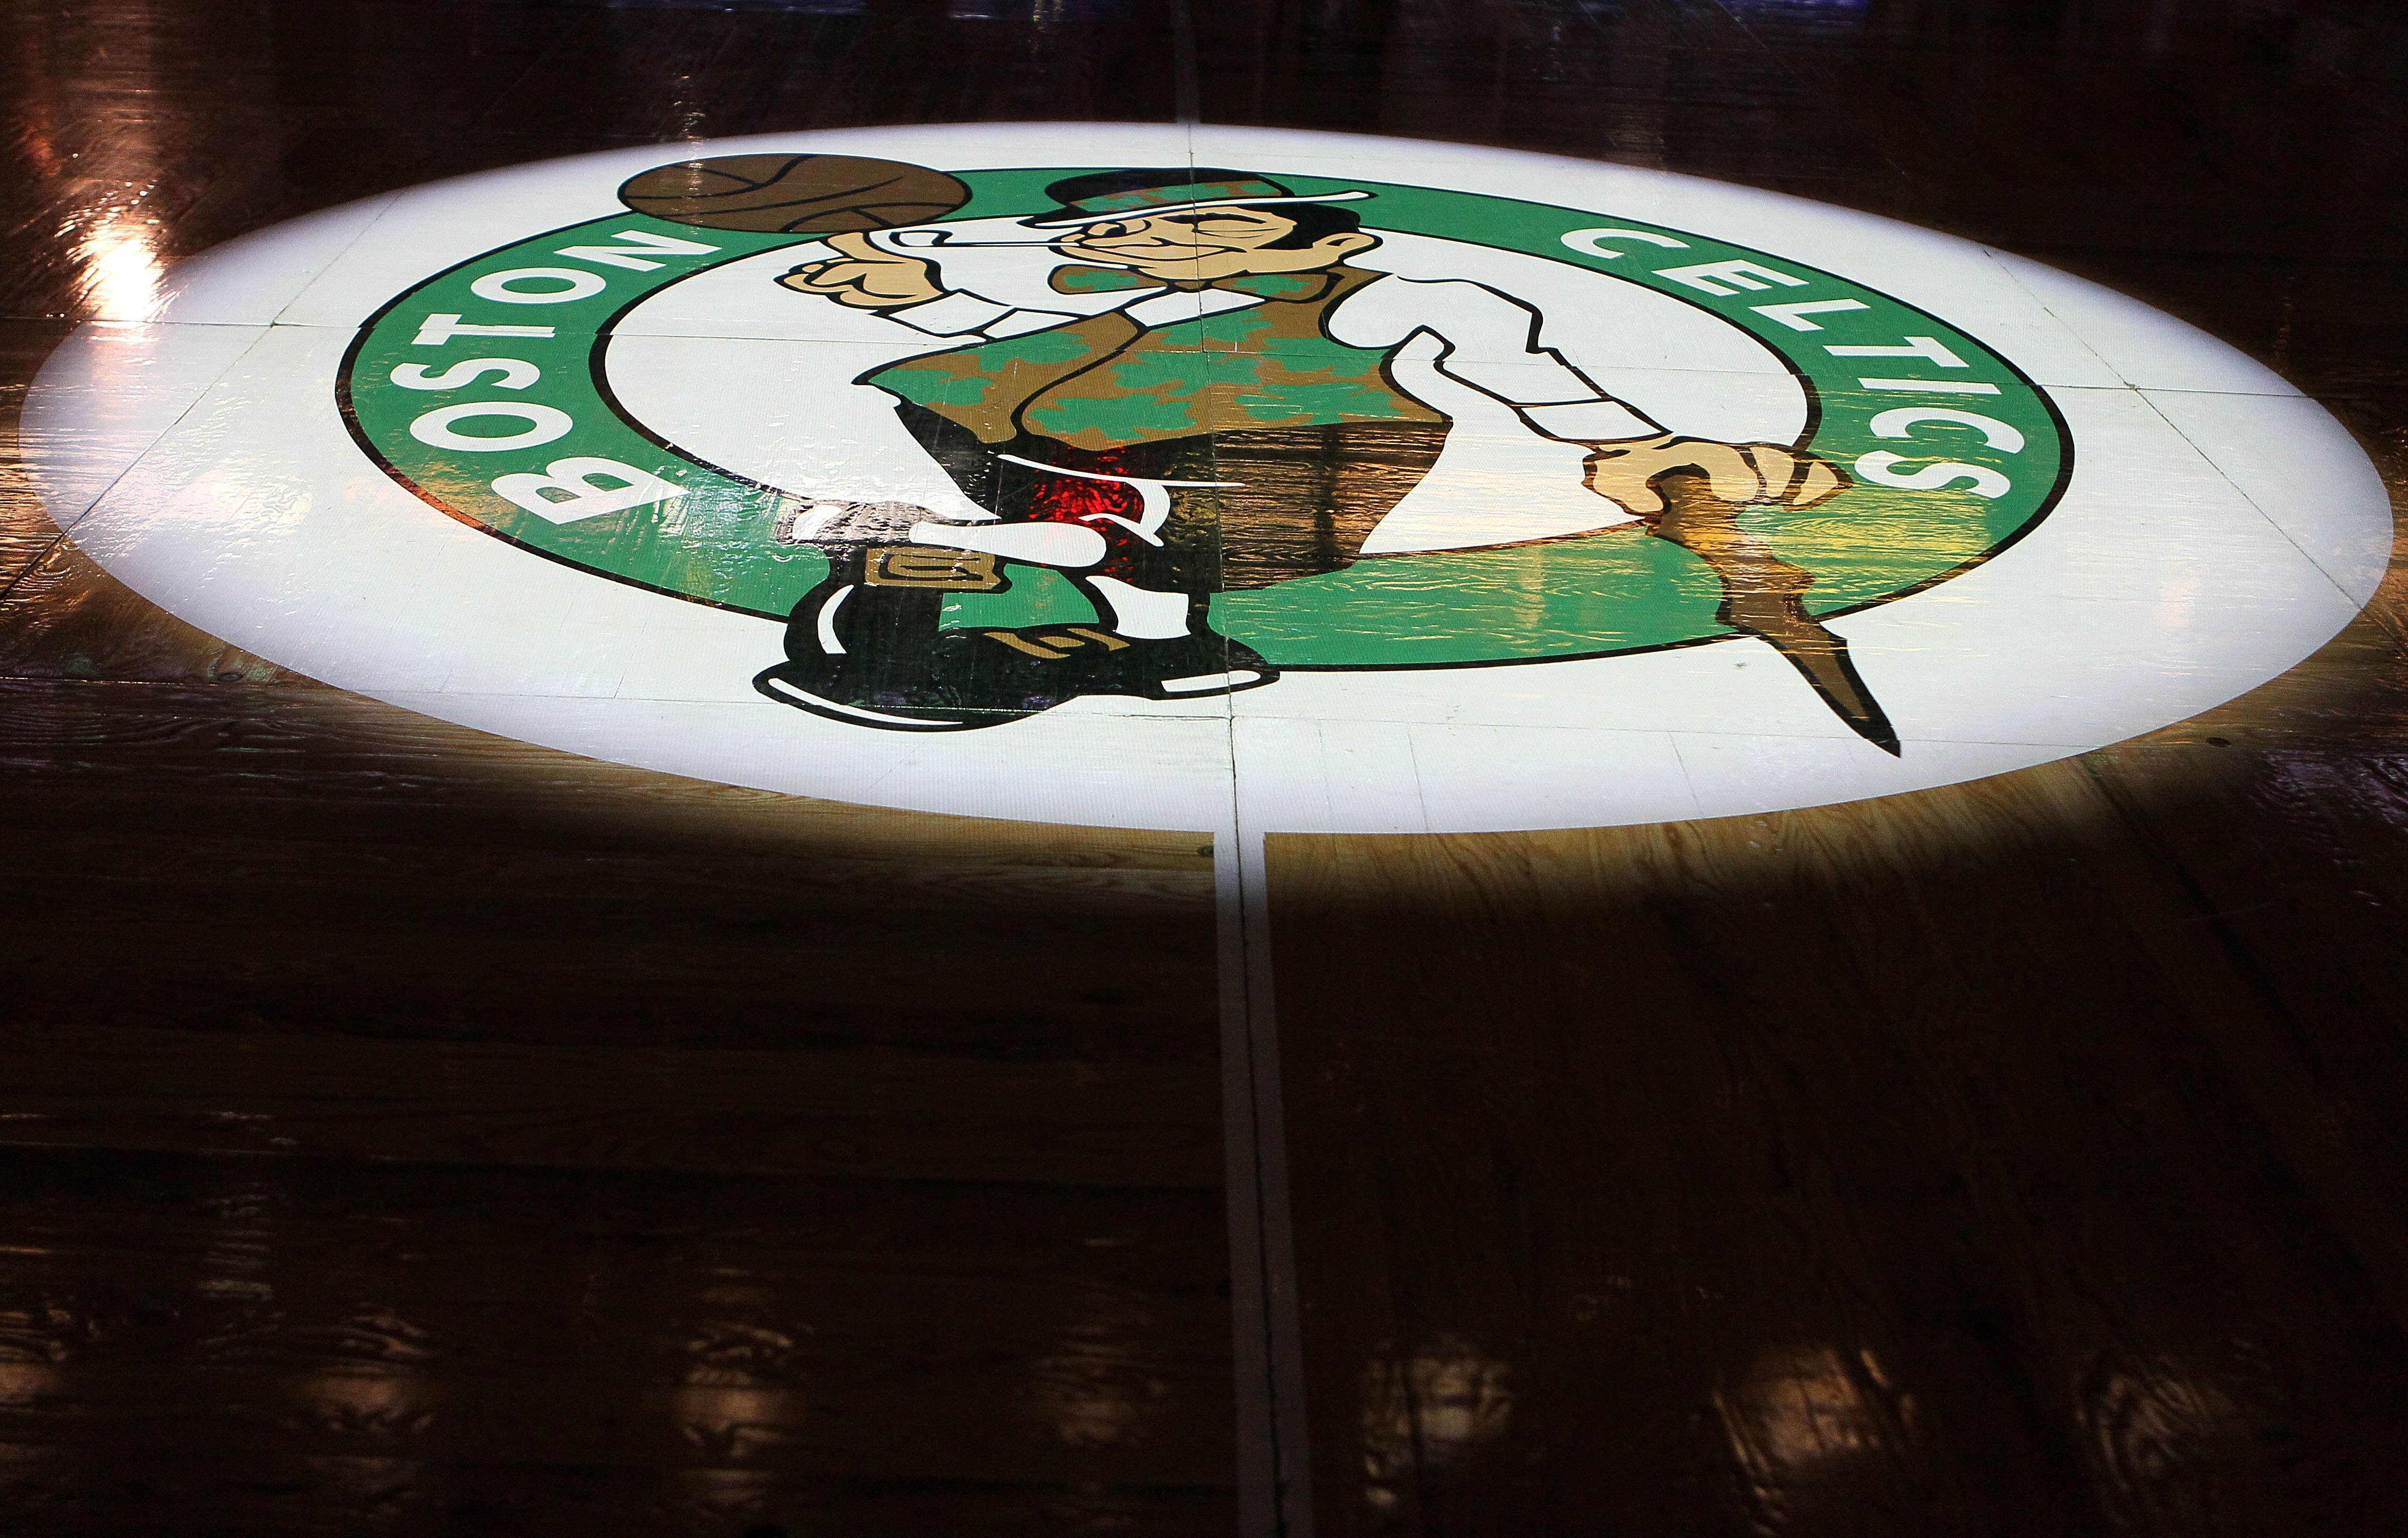 A detail of the Boston Celtics logo is seen on the court